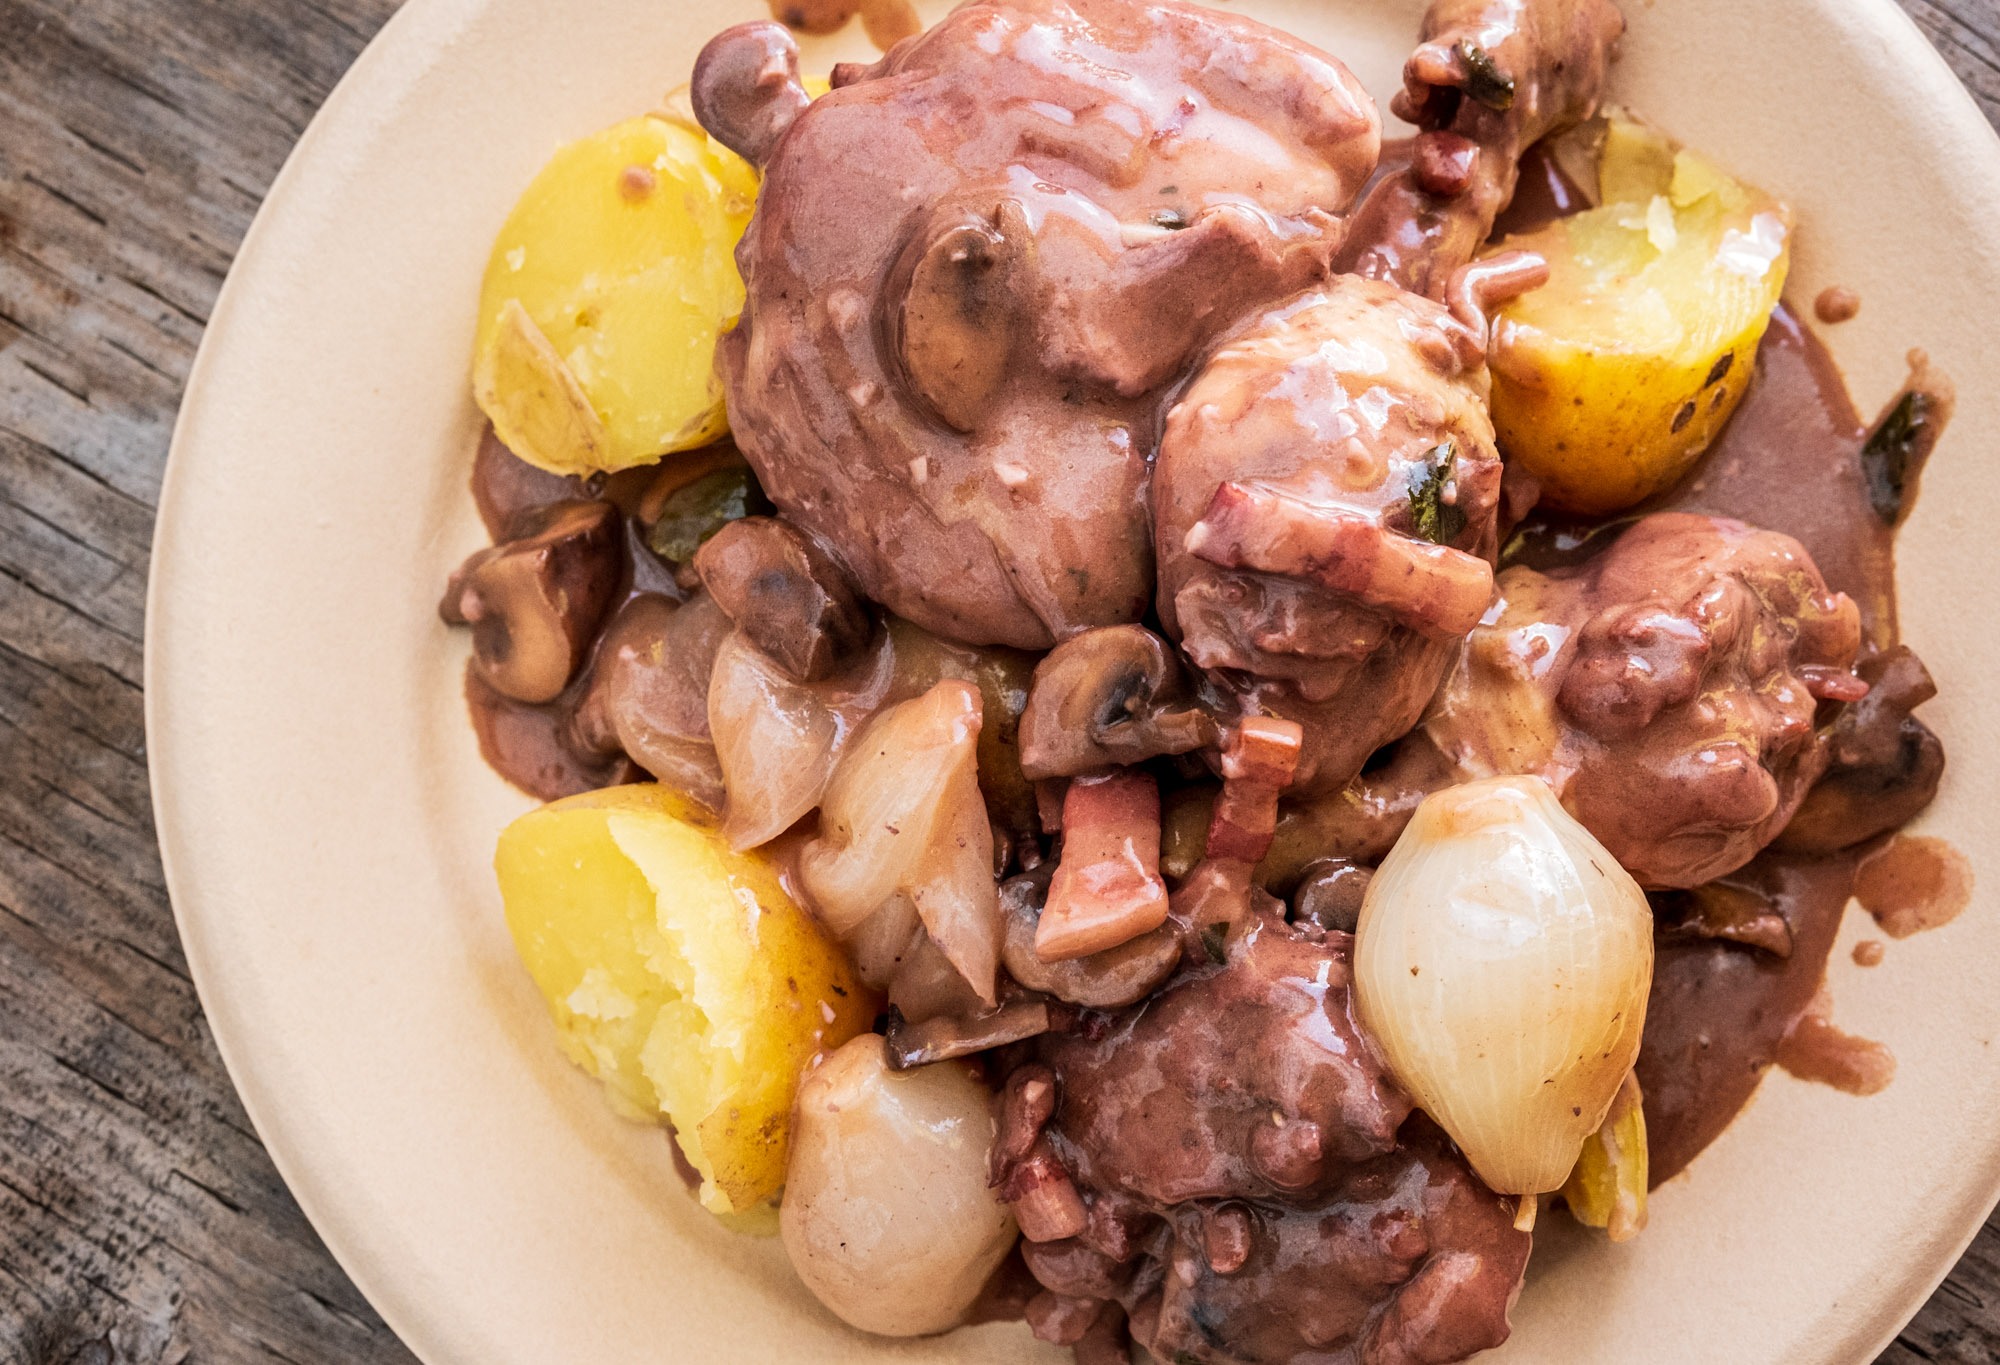 Plate of coq au vin served with potatoes, mushrooms and onions